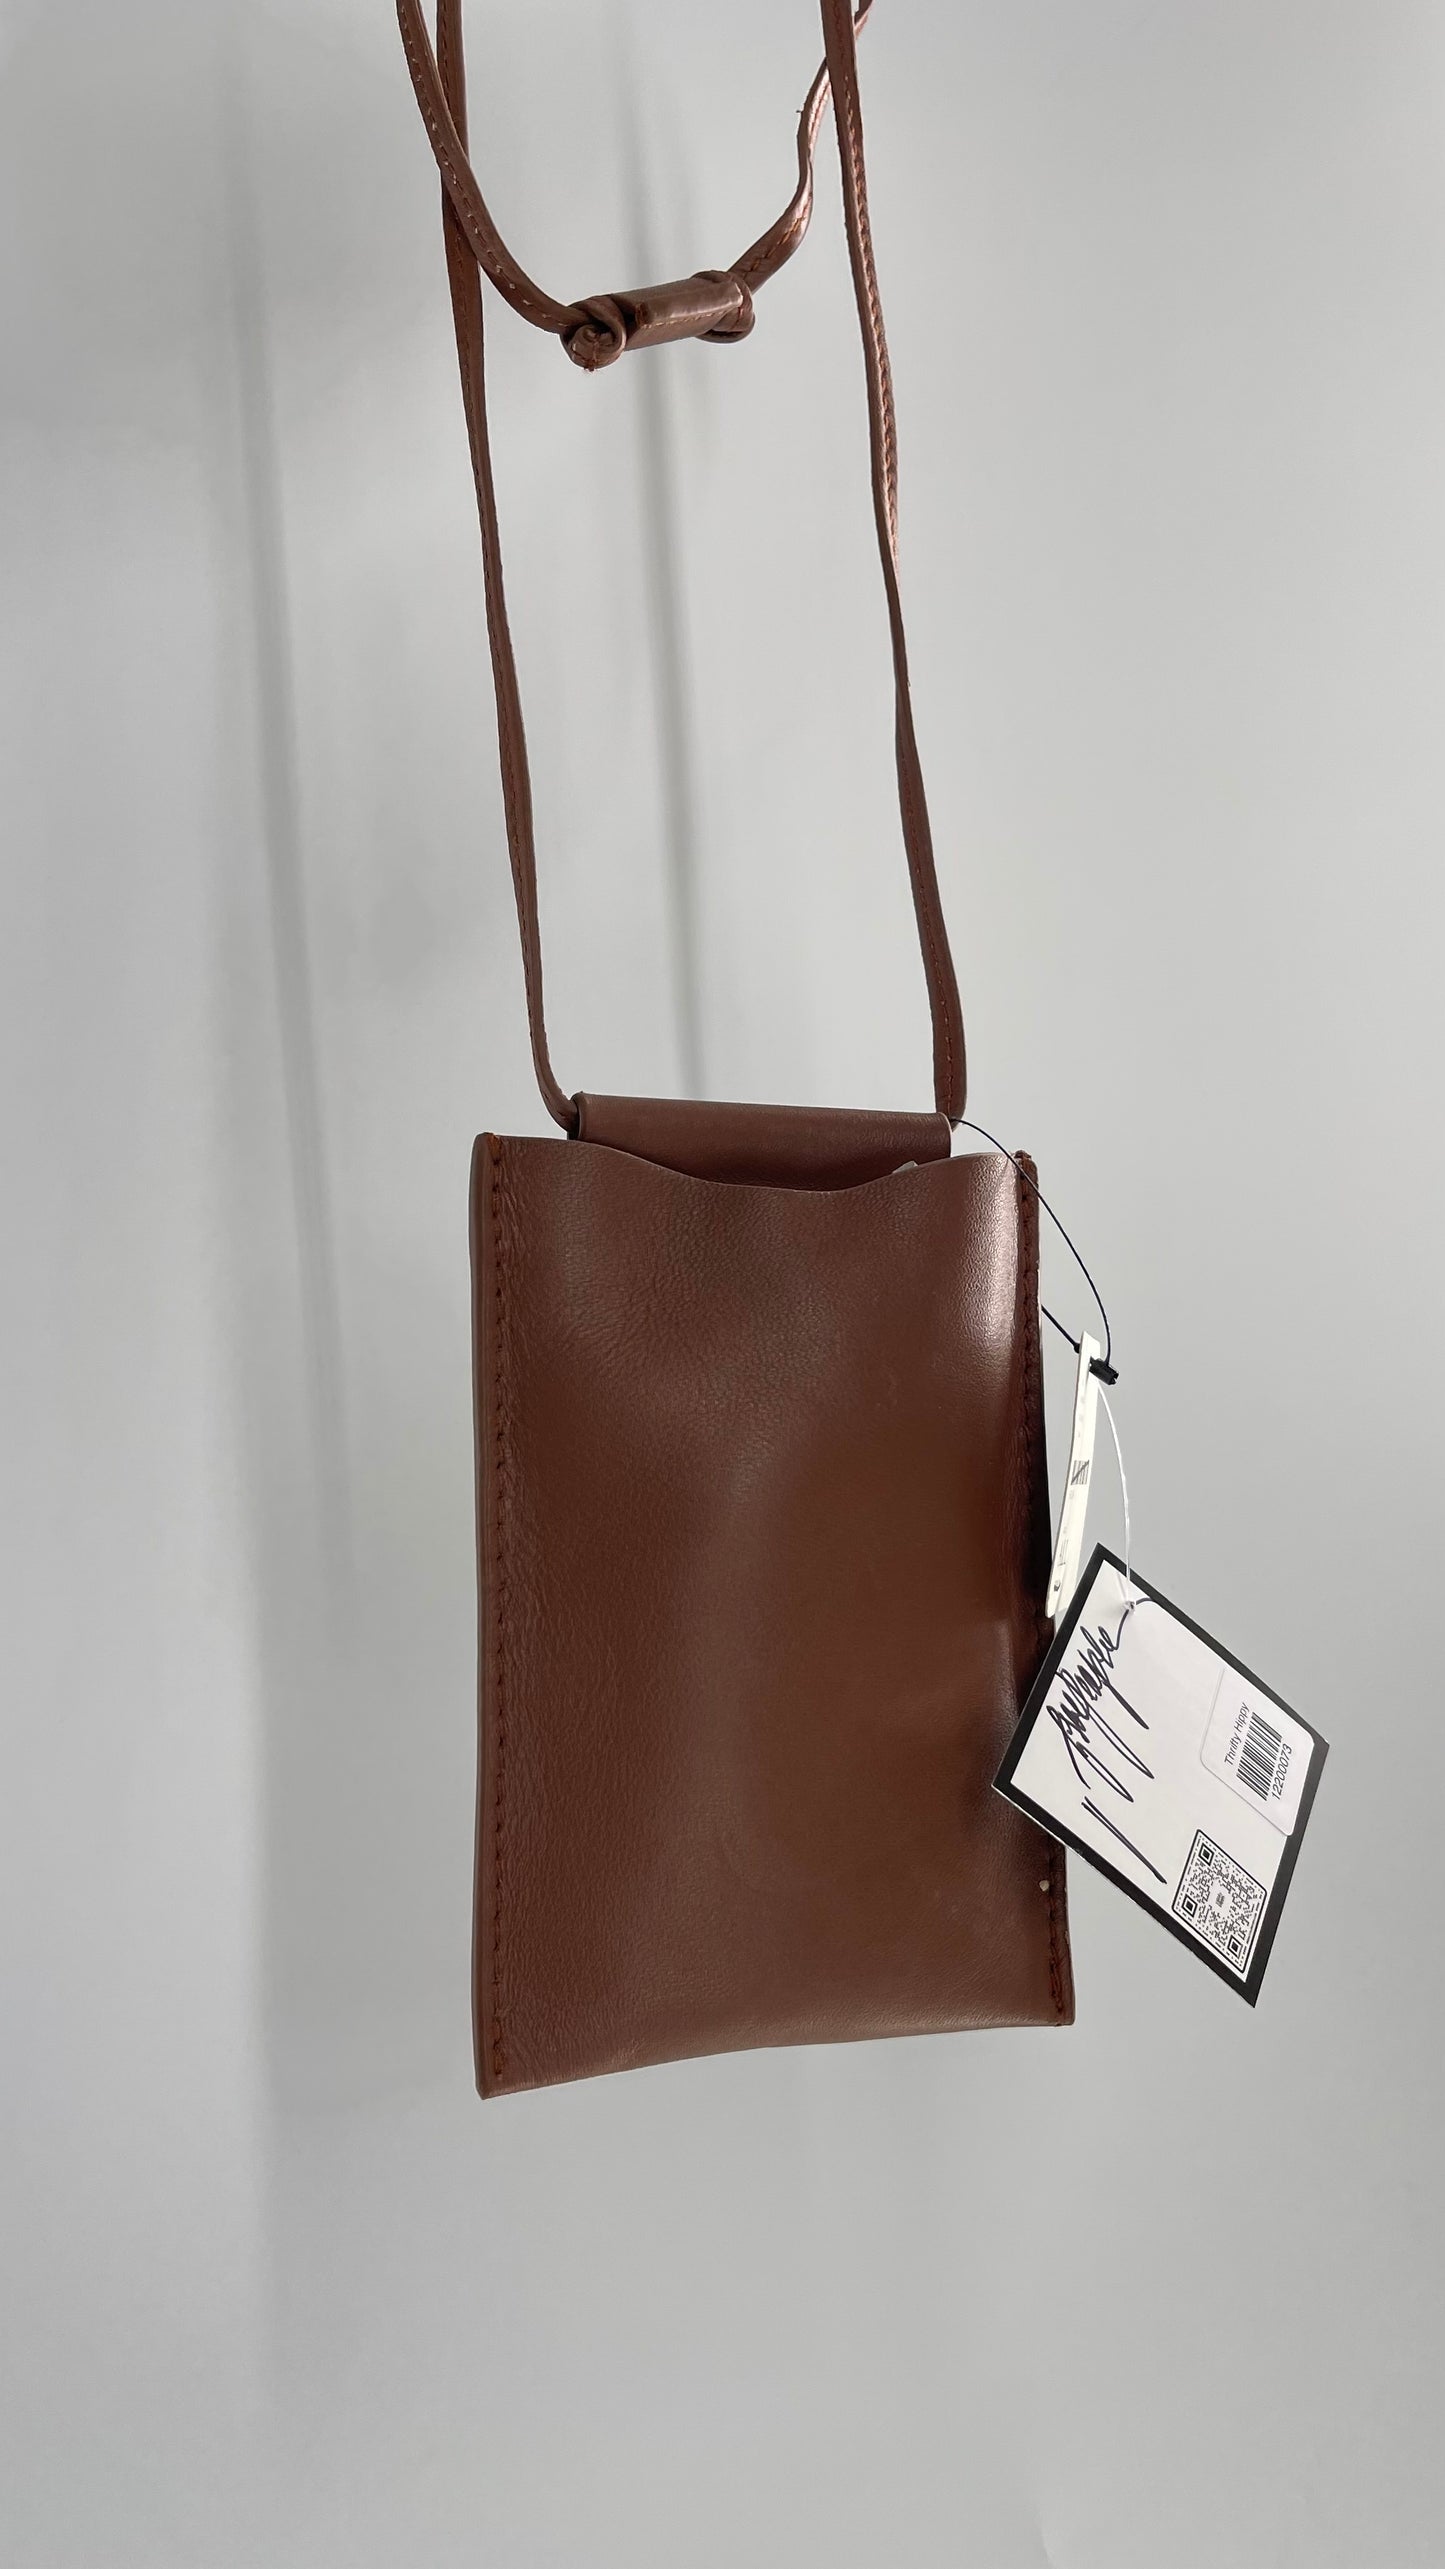 Free People Brown Leather Crossbody Phone Pouch with Tags Attached